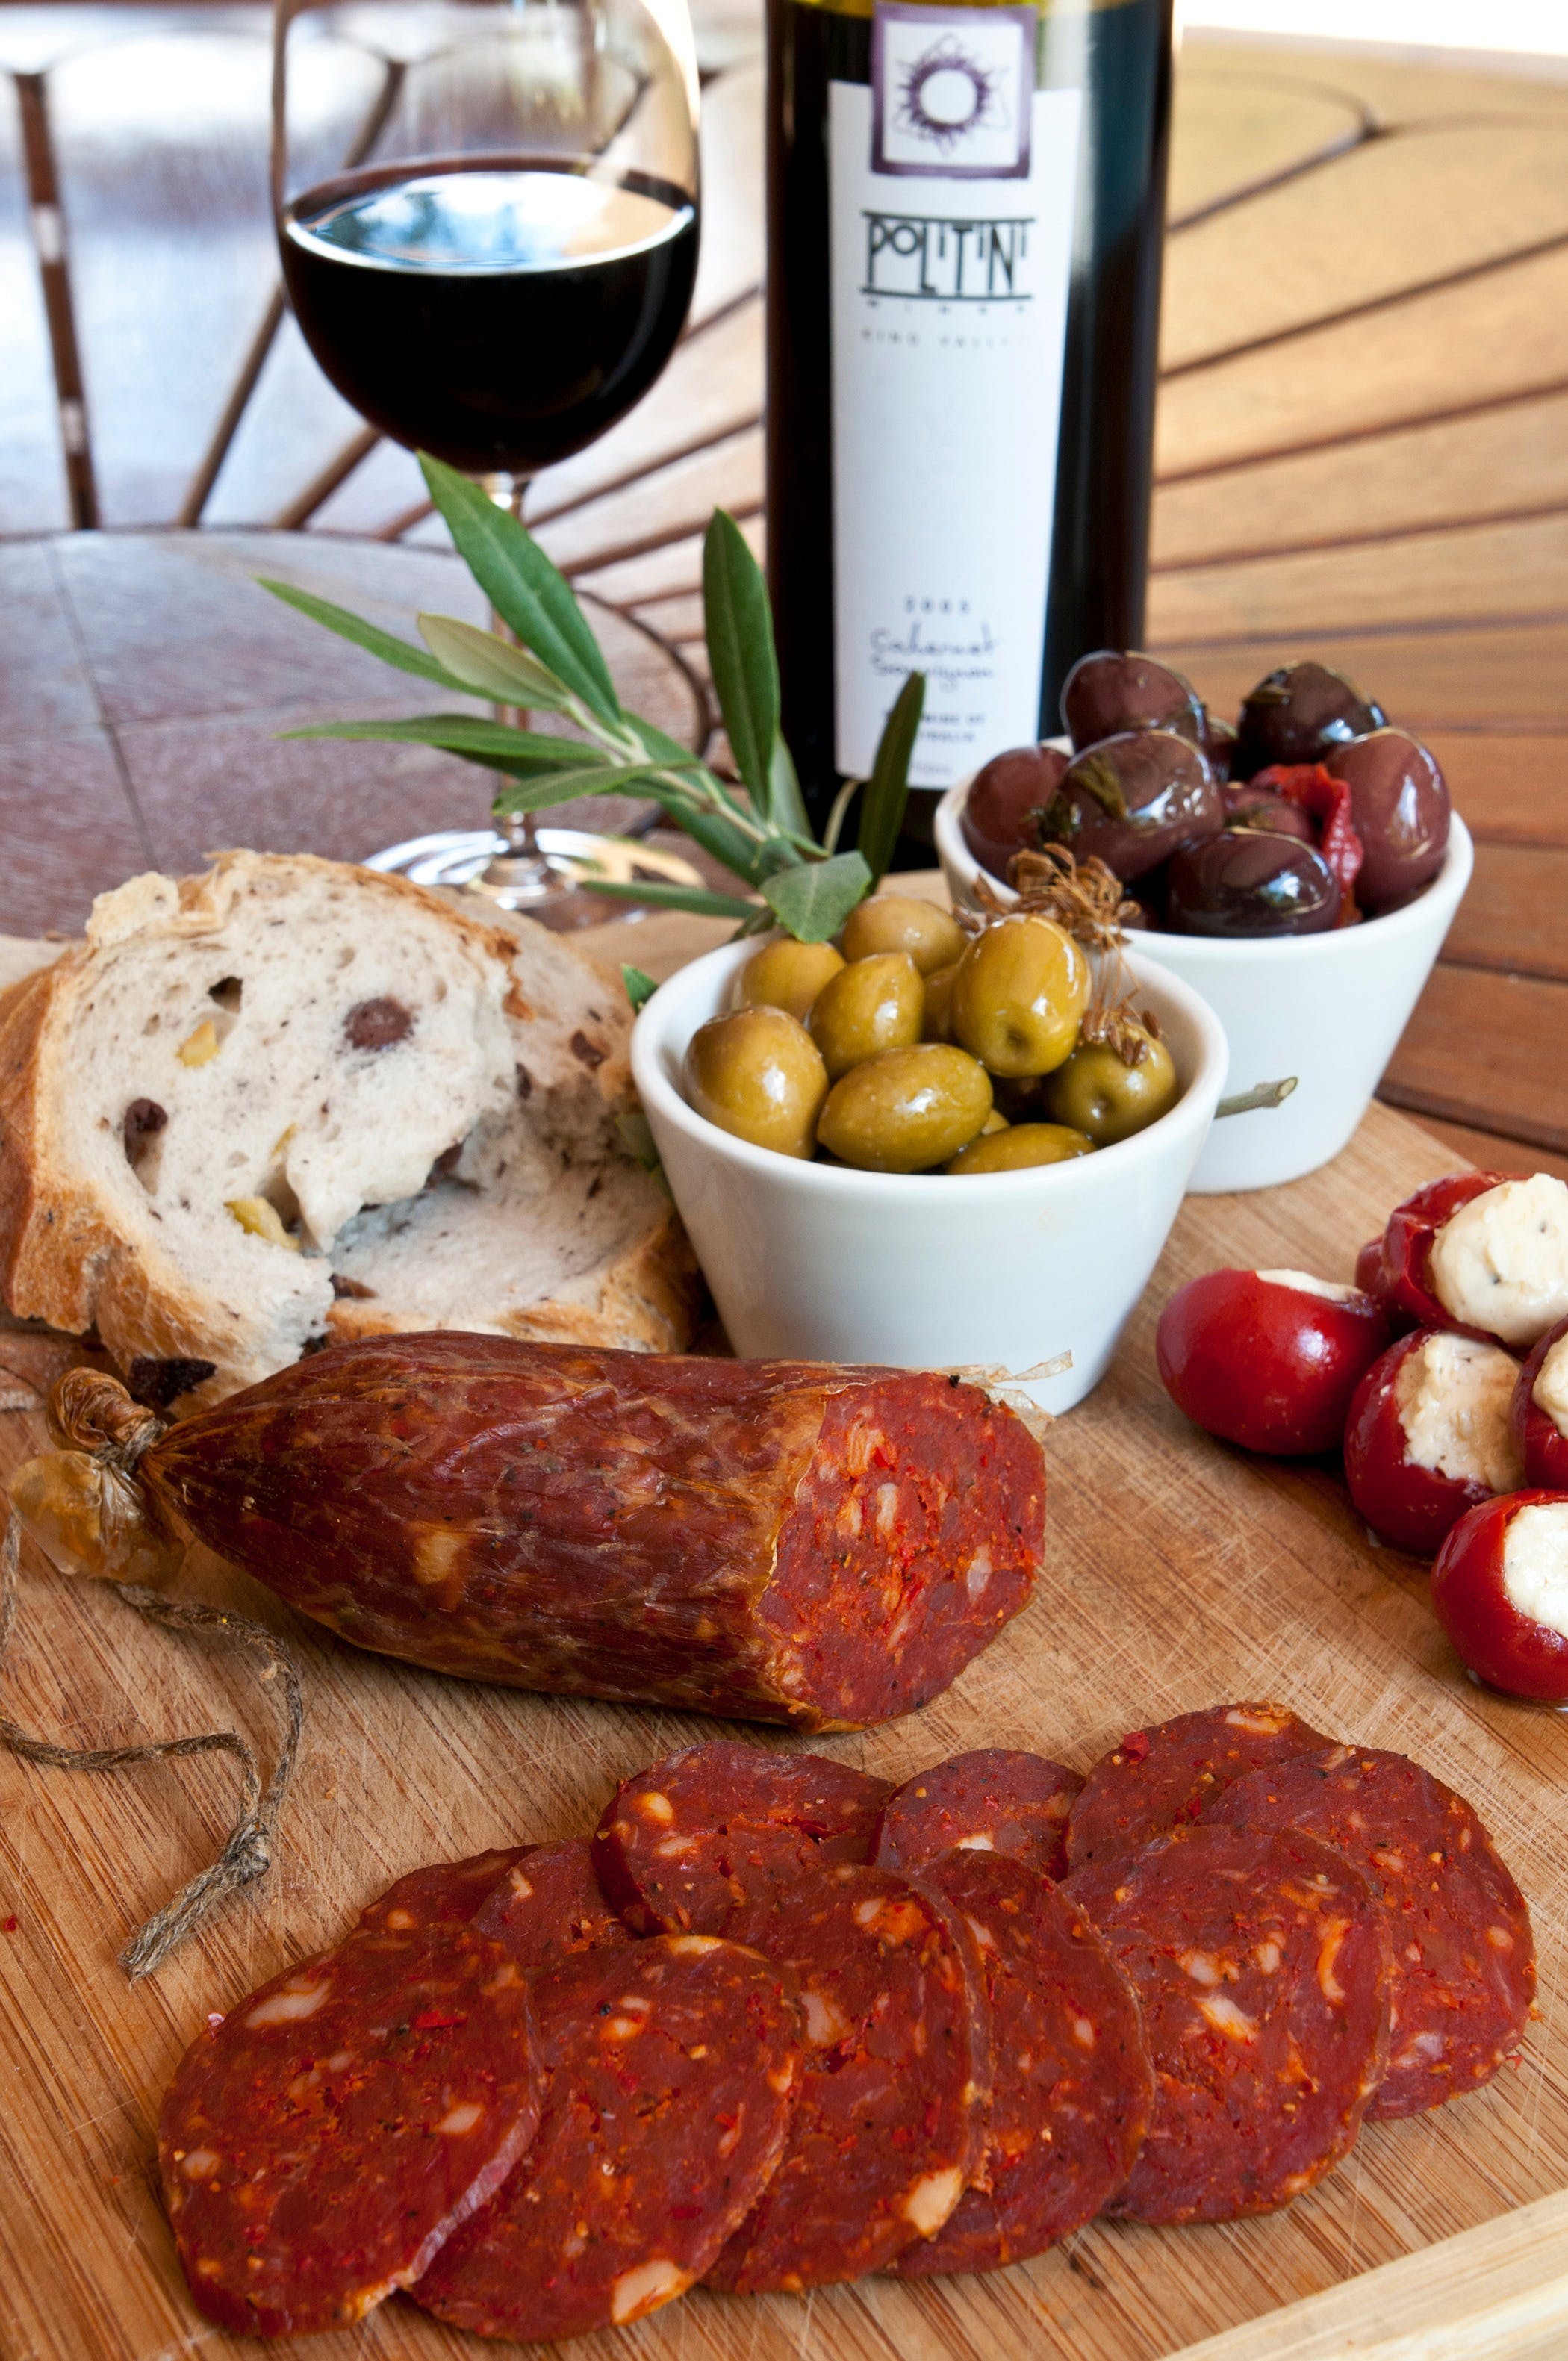 Salami and Salsicce Making classes at Politini Wines - Townsville Tourism